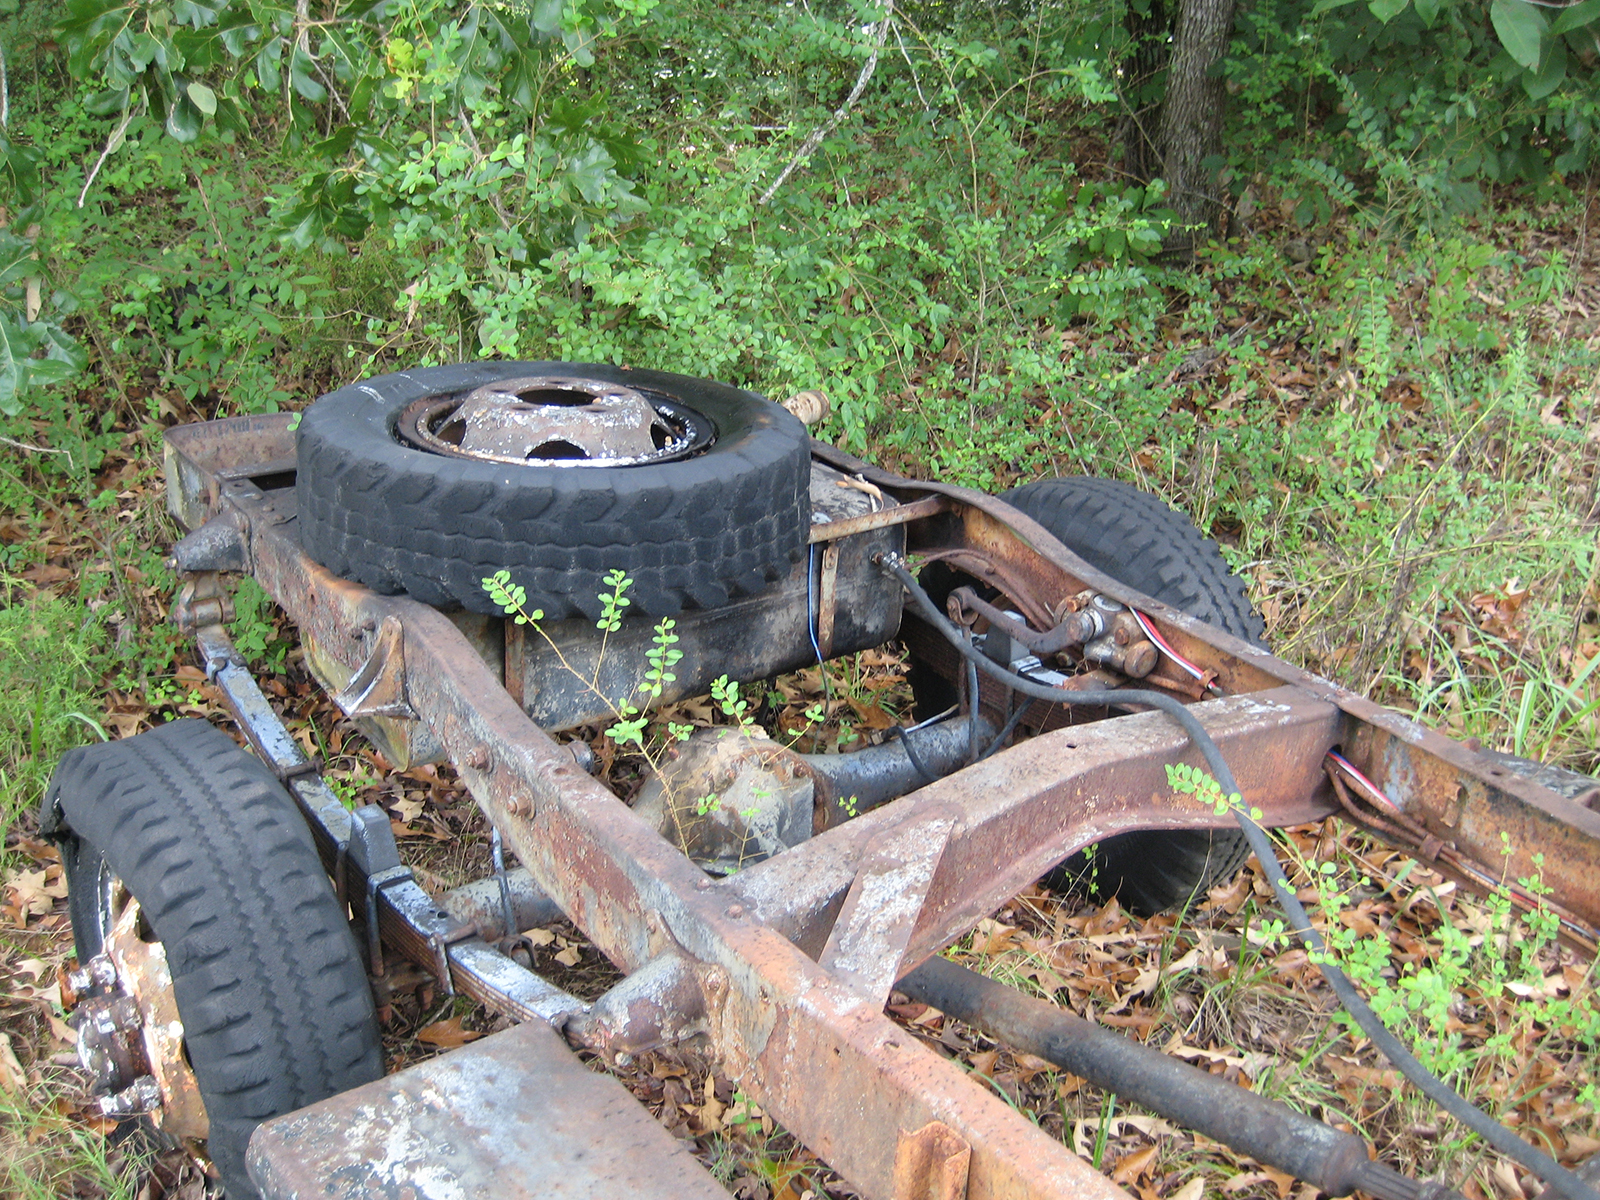 Back half of rusted chassis of 1941 Army Command Car with an extra tire, surrounded by overgrown weeds and grass.